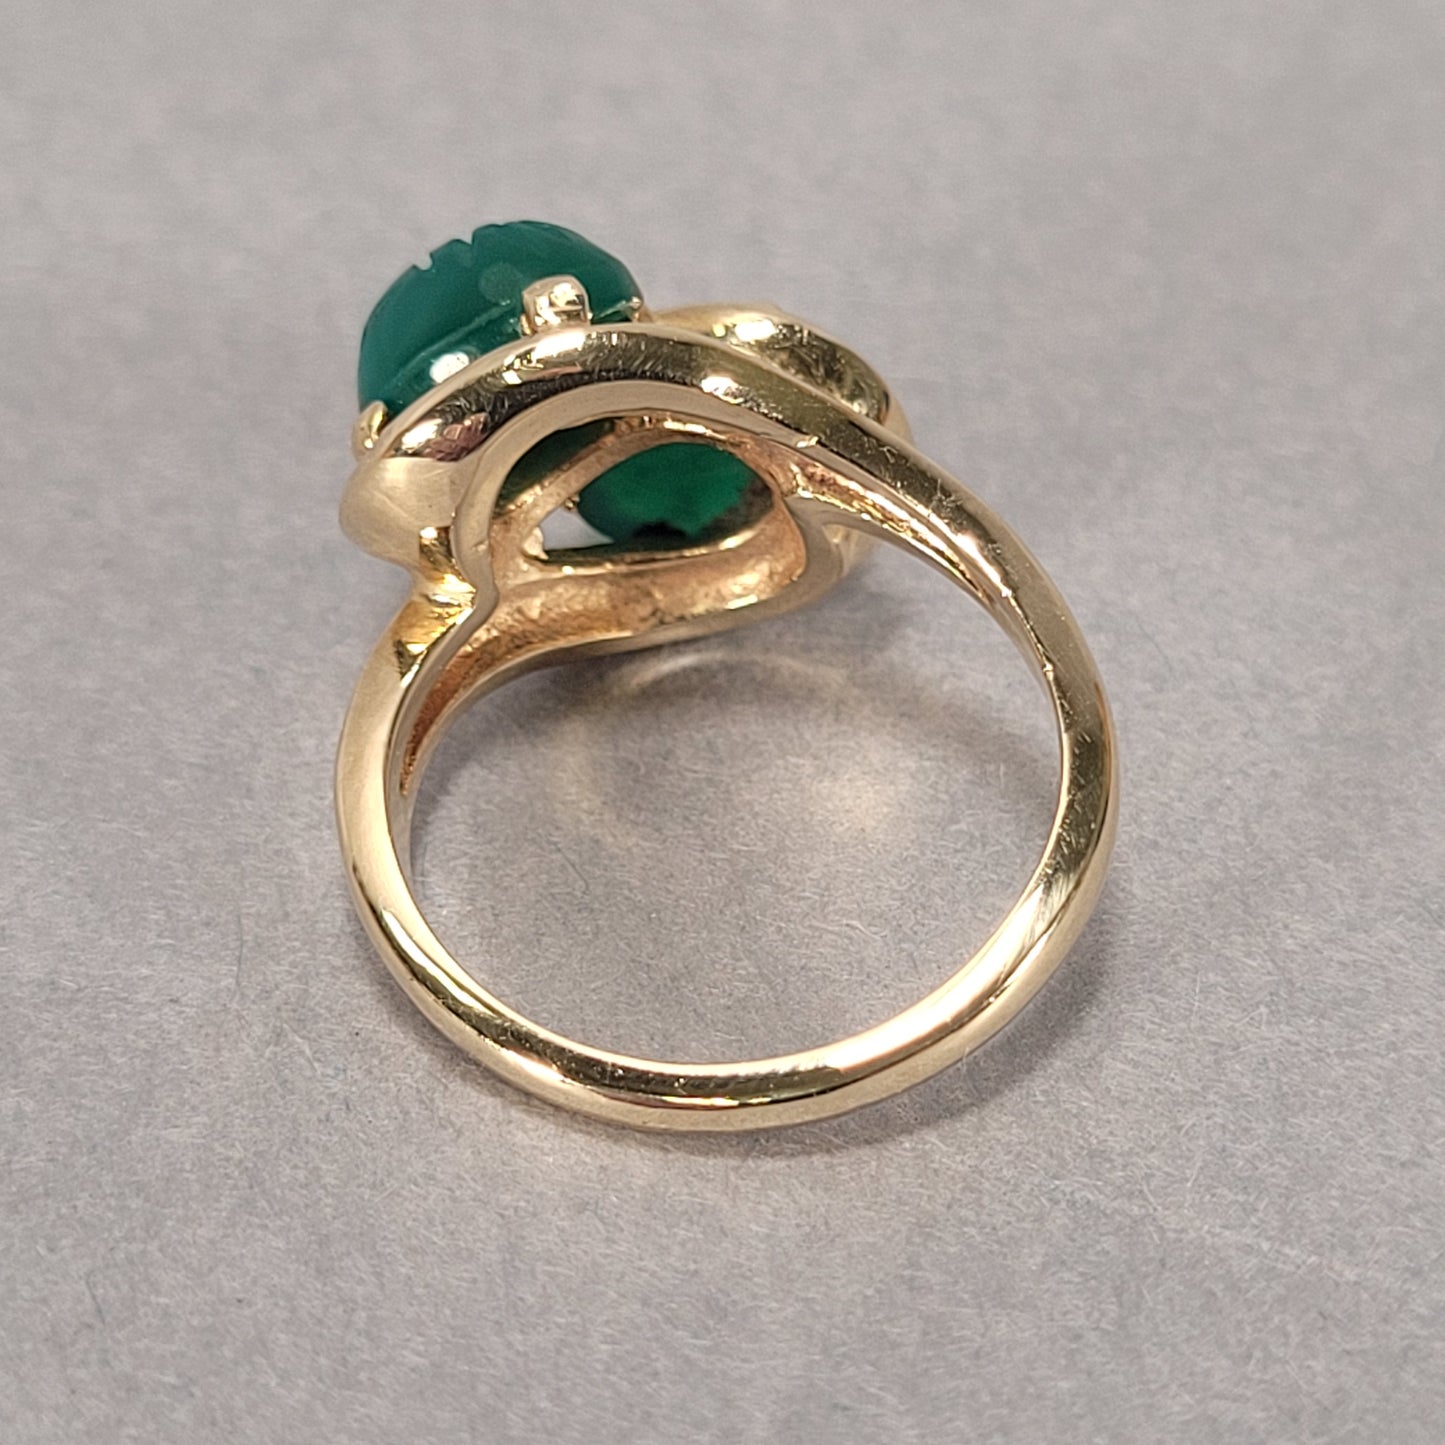 10k Yellow Gold & Synthetic Jade Ring 5.1g